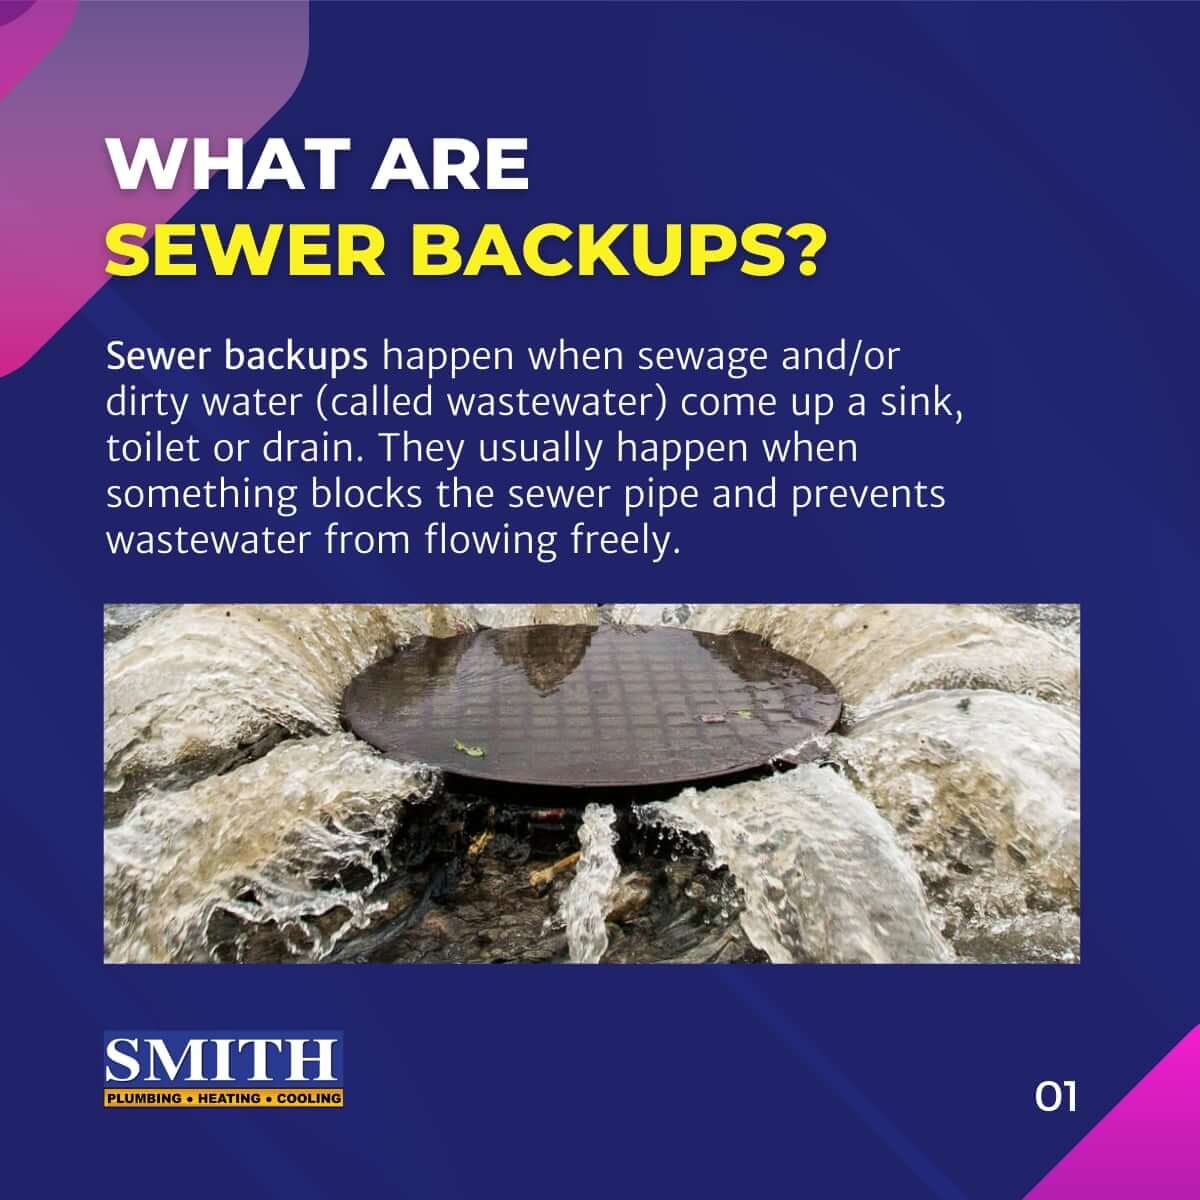 What are sewer backups